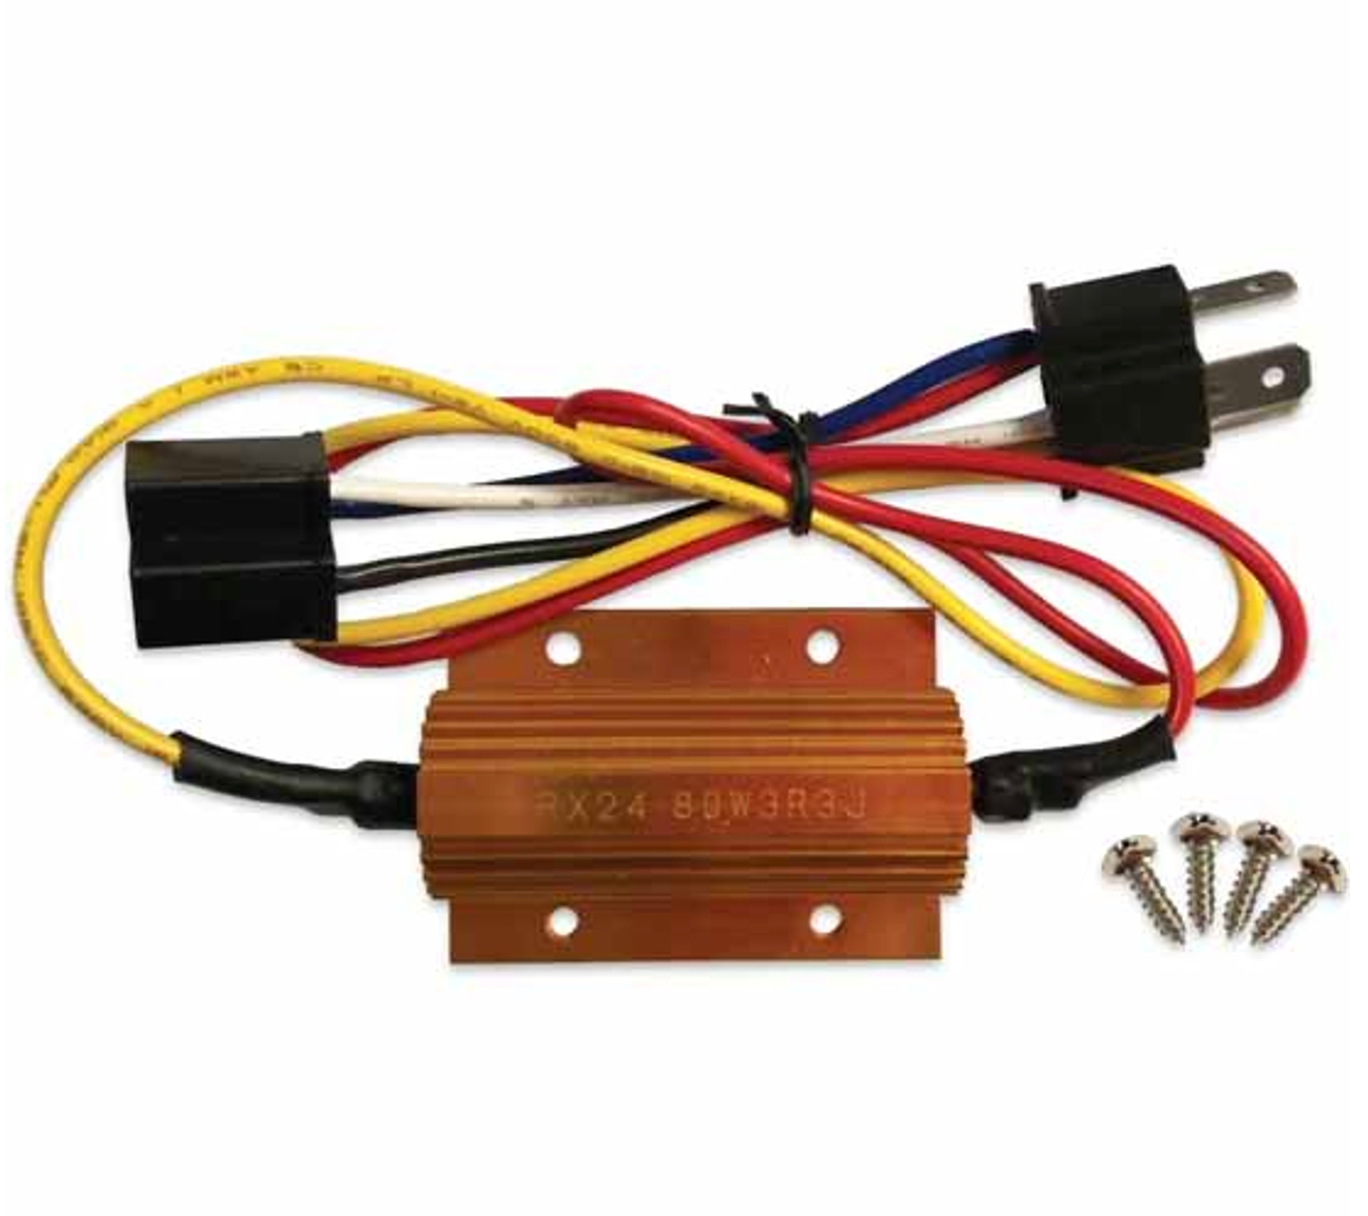 80 Watt Load Resistor For LED Headlight Conversions With 3 Prong Plug-Ins